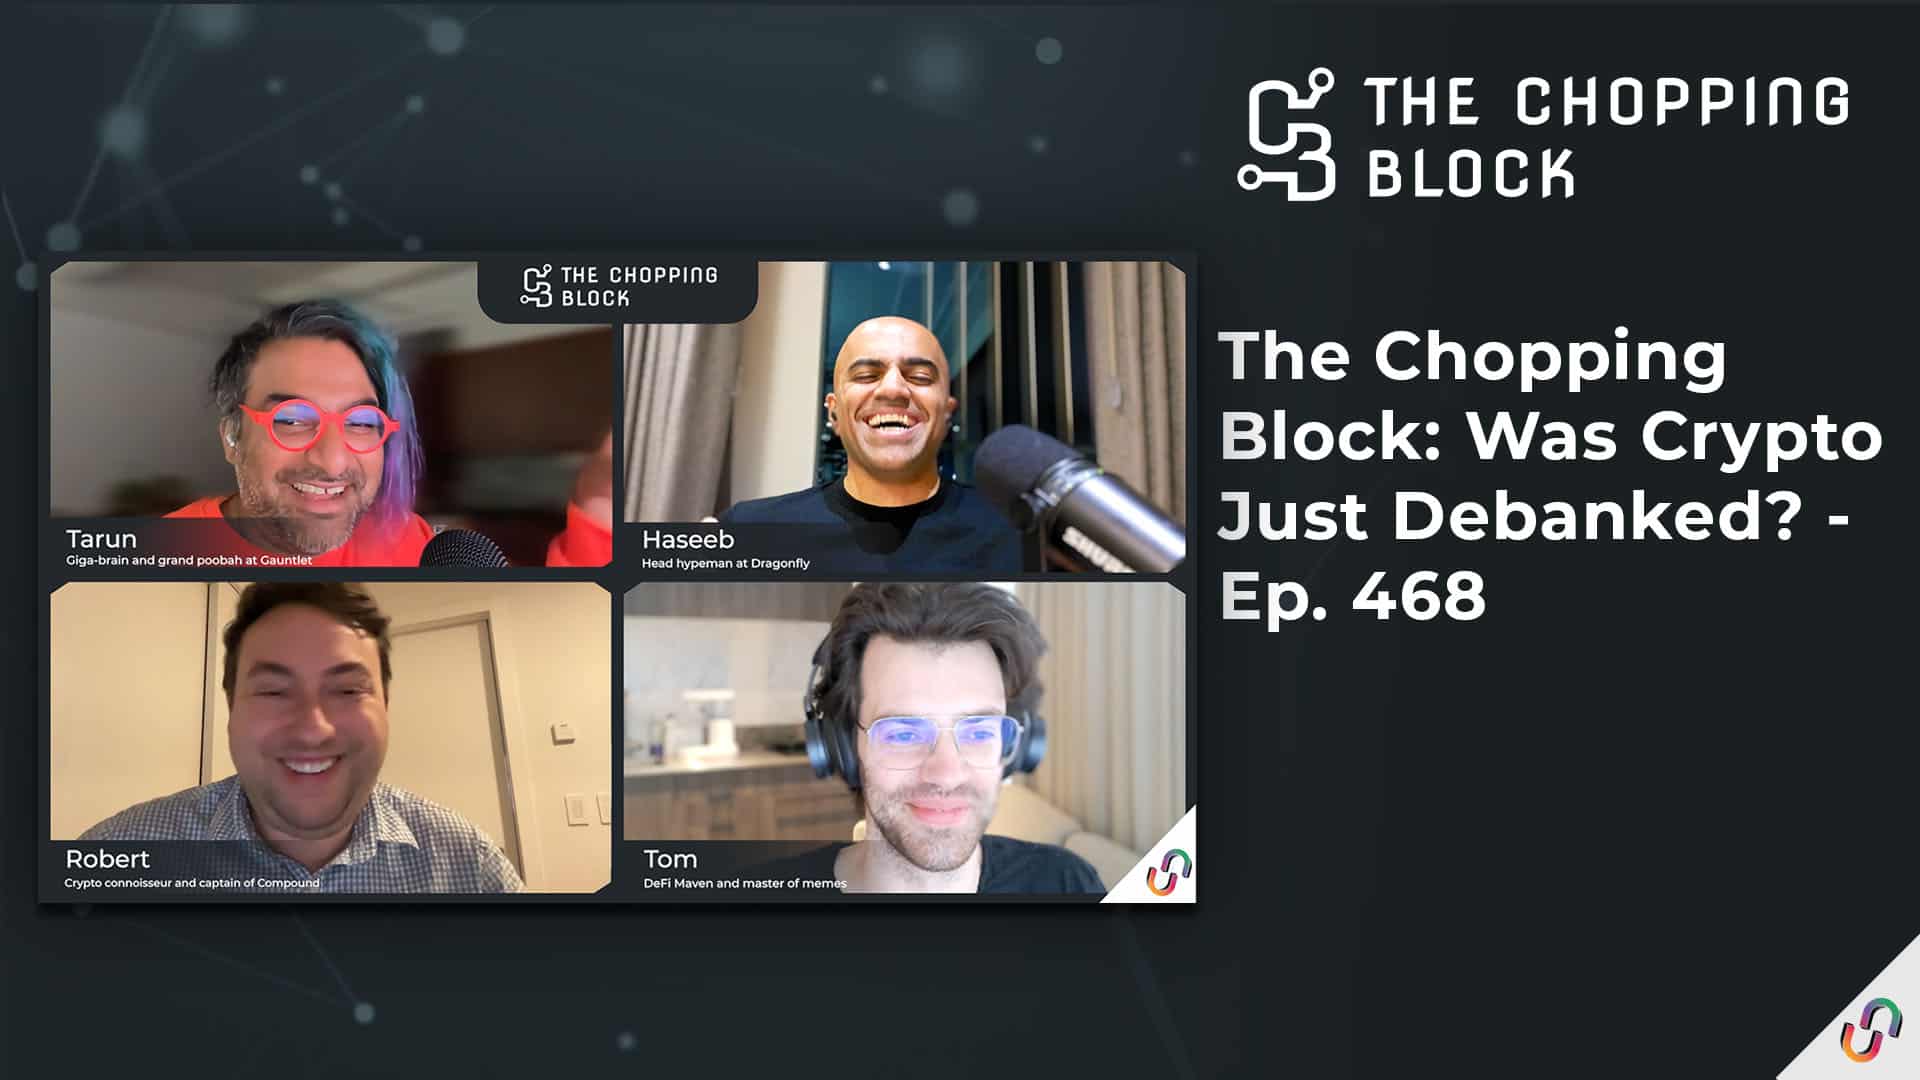 The Chopping Block: Was Crypto Just Debanked? - Ep. 468